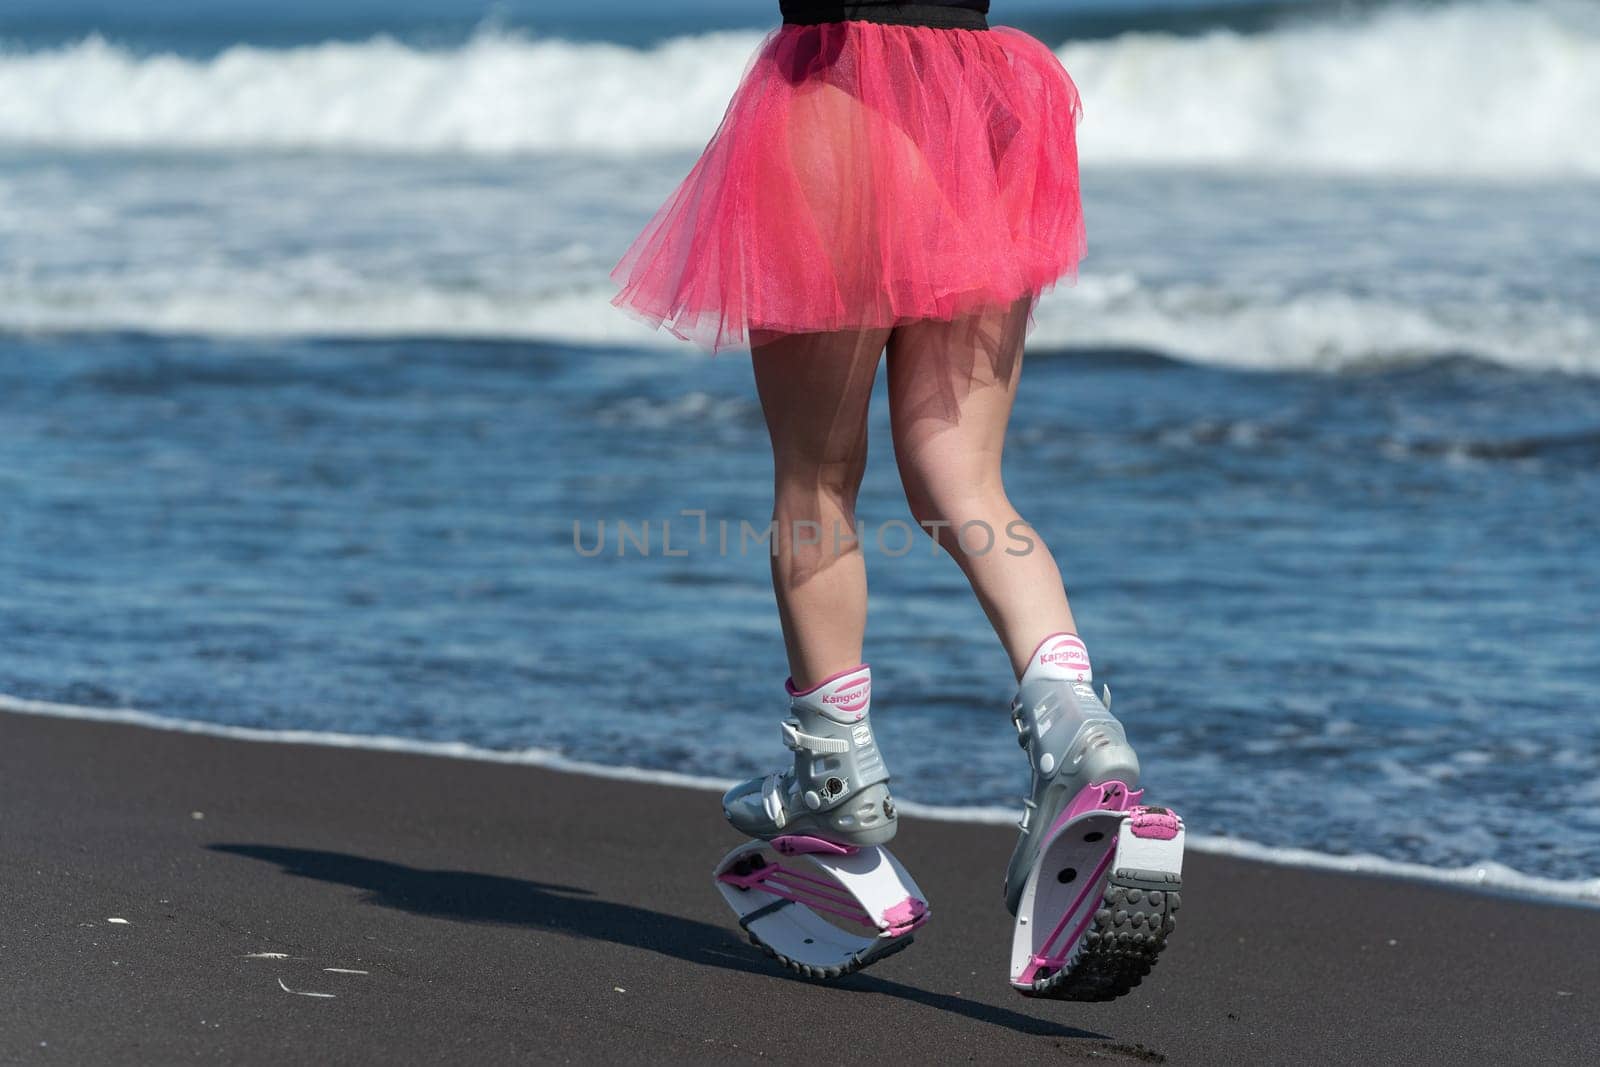 KAMCHATKA, RUSSIA - JUNE 15, 2022: Rear view of woman legs in sports boots Kangoo Jumps, black swimsuit and short skirt running on black sandy beach. Outdoors fitness workout on summer sea shore